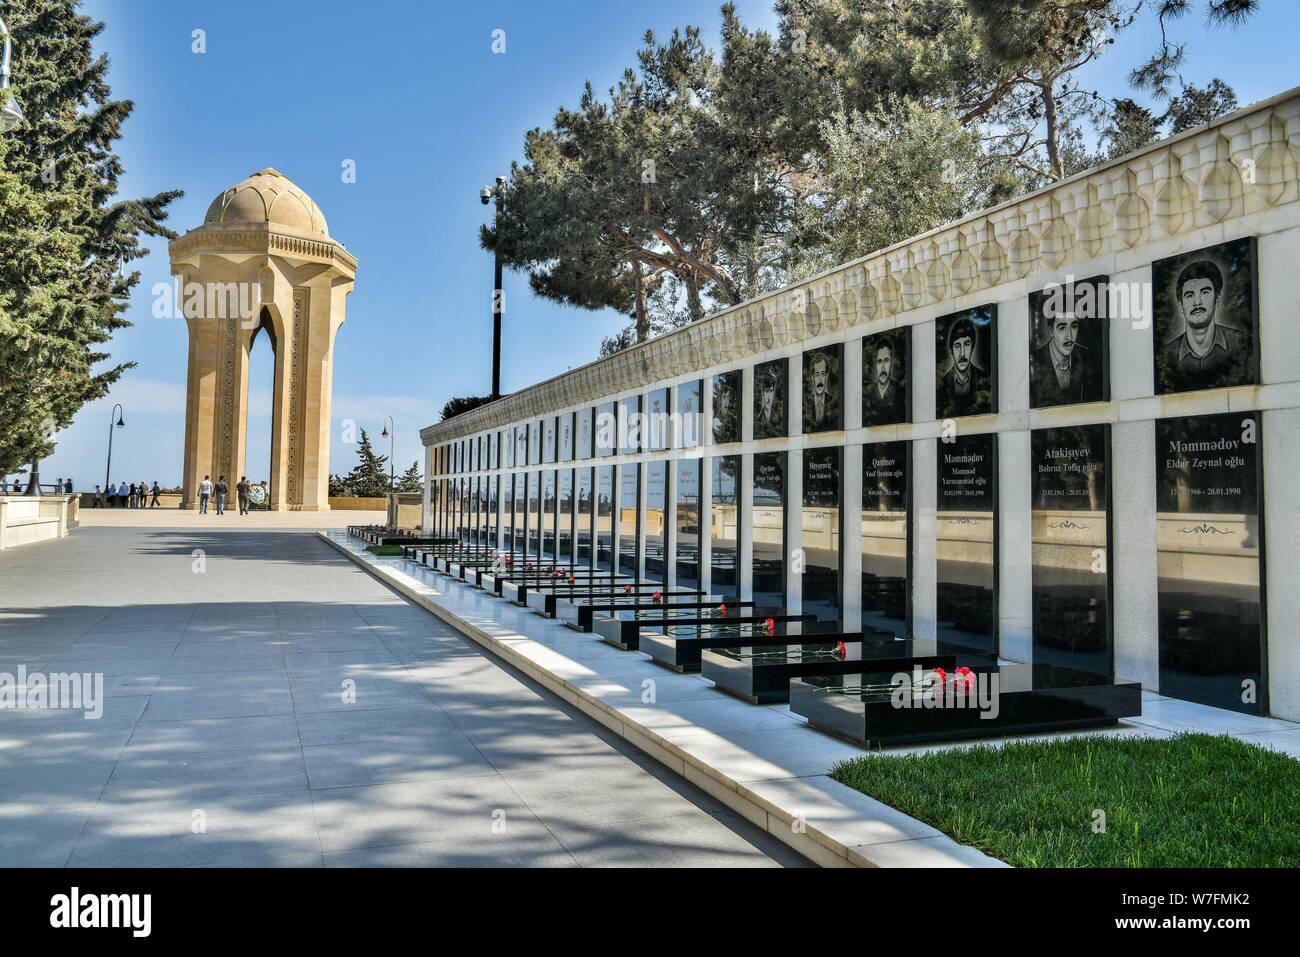 Baku, Azerbaijan - May 2, 2019. View of the Alley of Martyrs, towards the Eternal Flame Memorial, in Baku. View with graves and people. The Alley of M Stock Photo